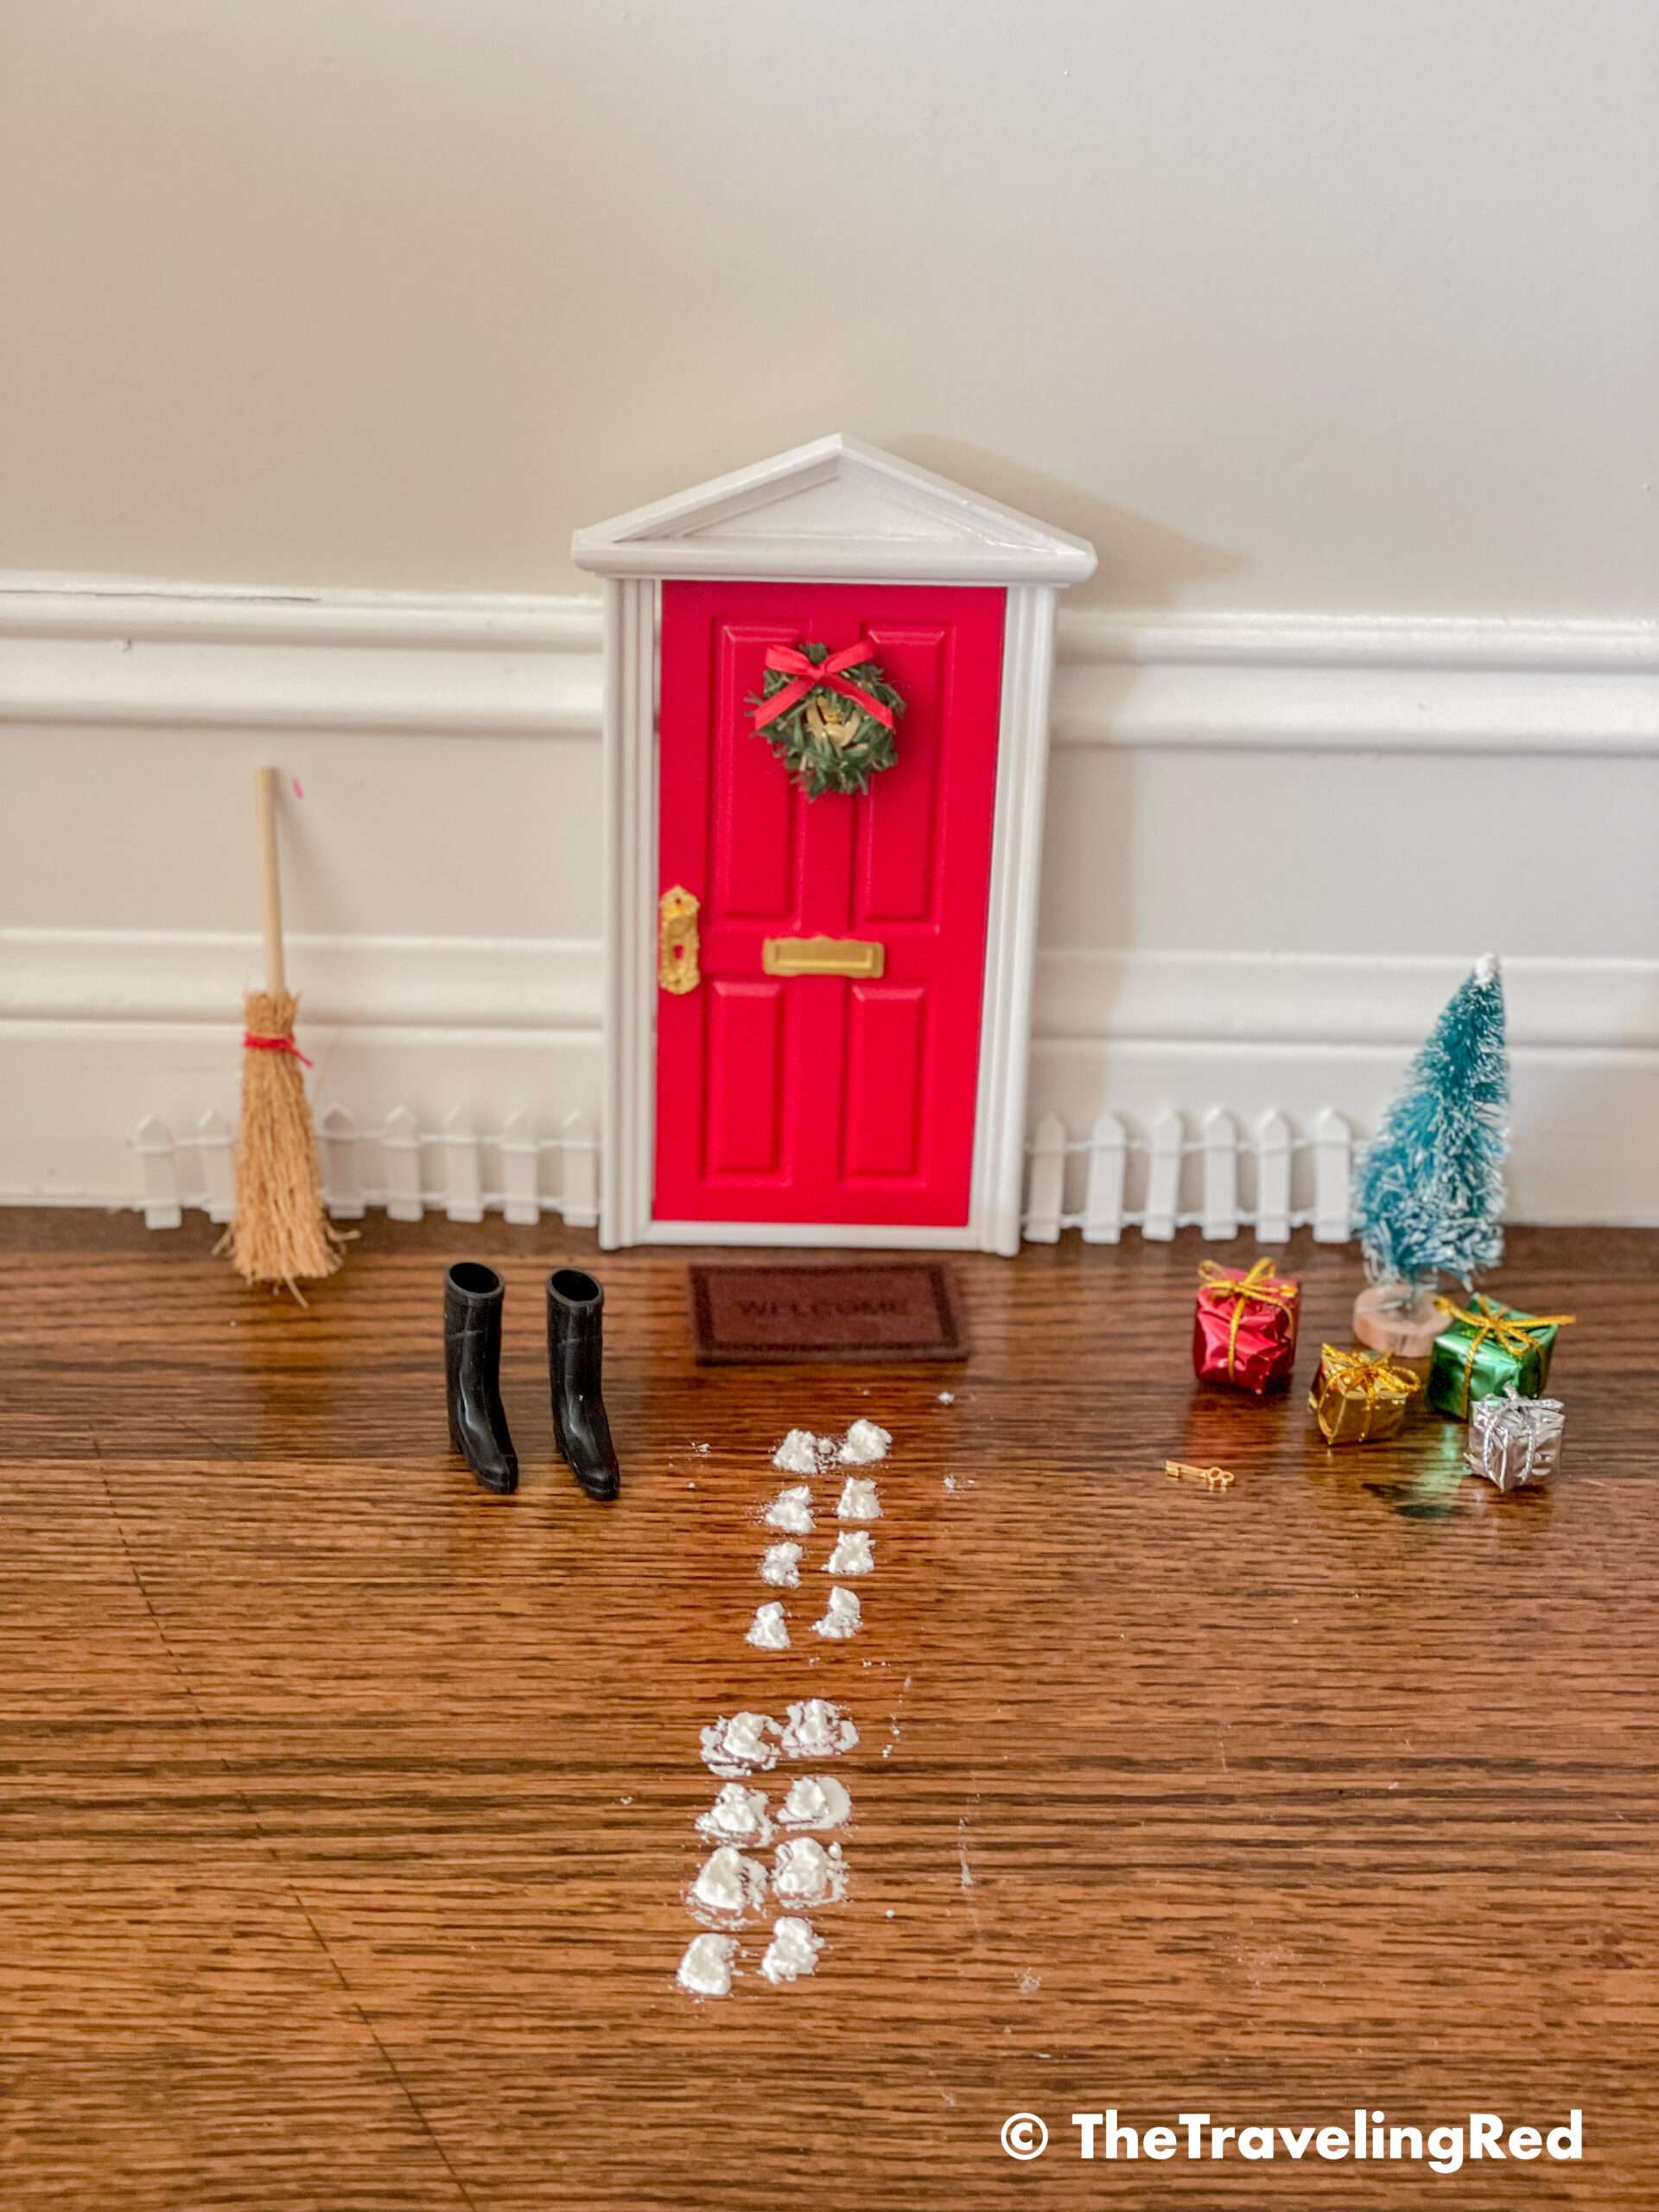 Naughty Elf on the shelf entered our home through a magic elf door and left us snowy footprints on the floor. This is how we knew we had to look for her the first day. Fun and easy elf on the shelf ideas for a naughty elf that are quick and easy using things you have at home.